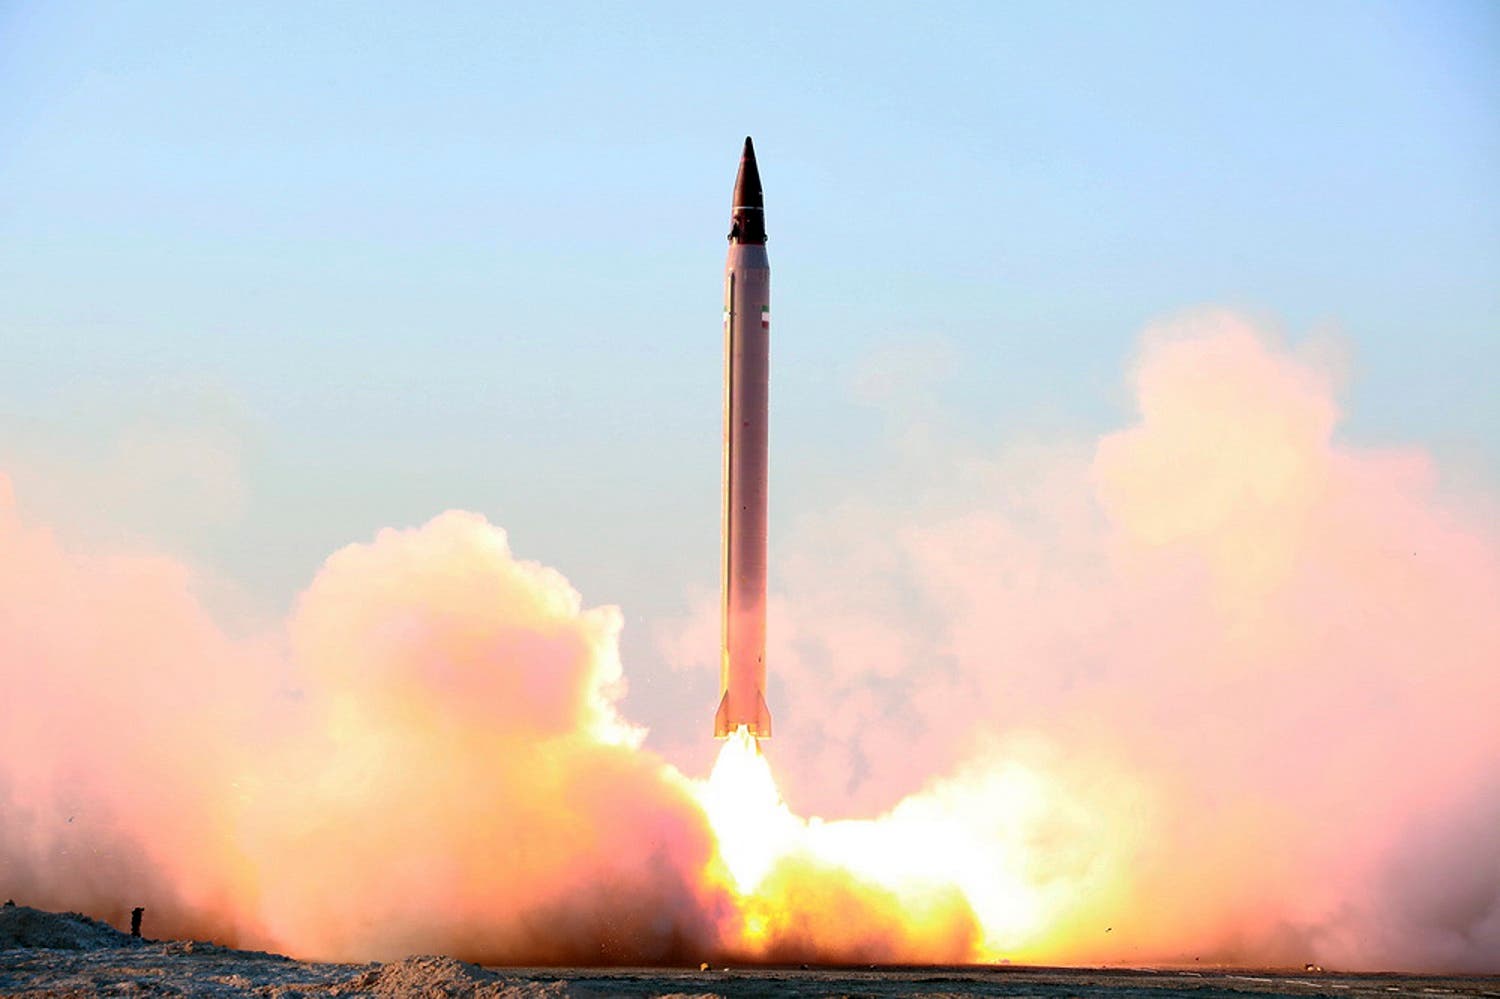 This picture released by the official website of the Iranian Defense Ministry on Sunday, Oct. 11, 2015, claims to show the launching of an Emad long-range ballistic surface-to-surface missile in an undisclosed location. ap